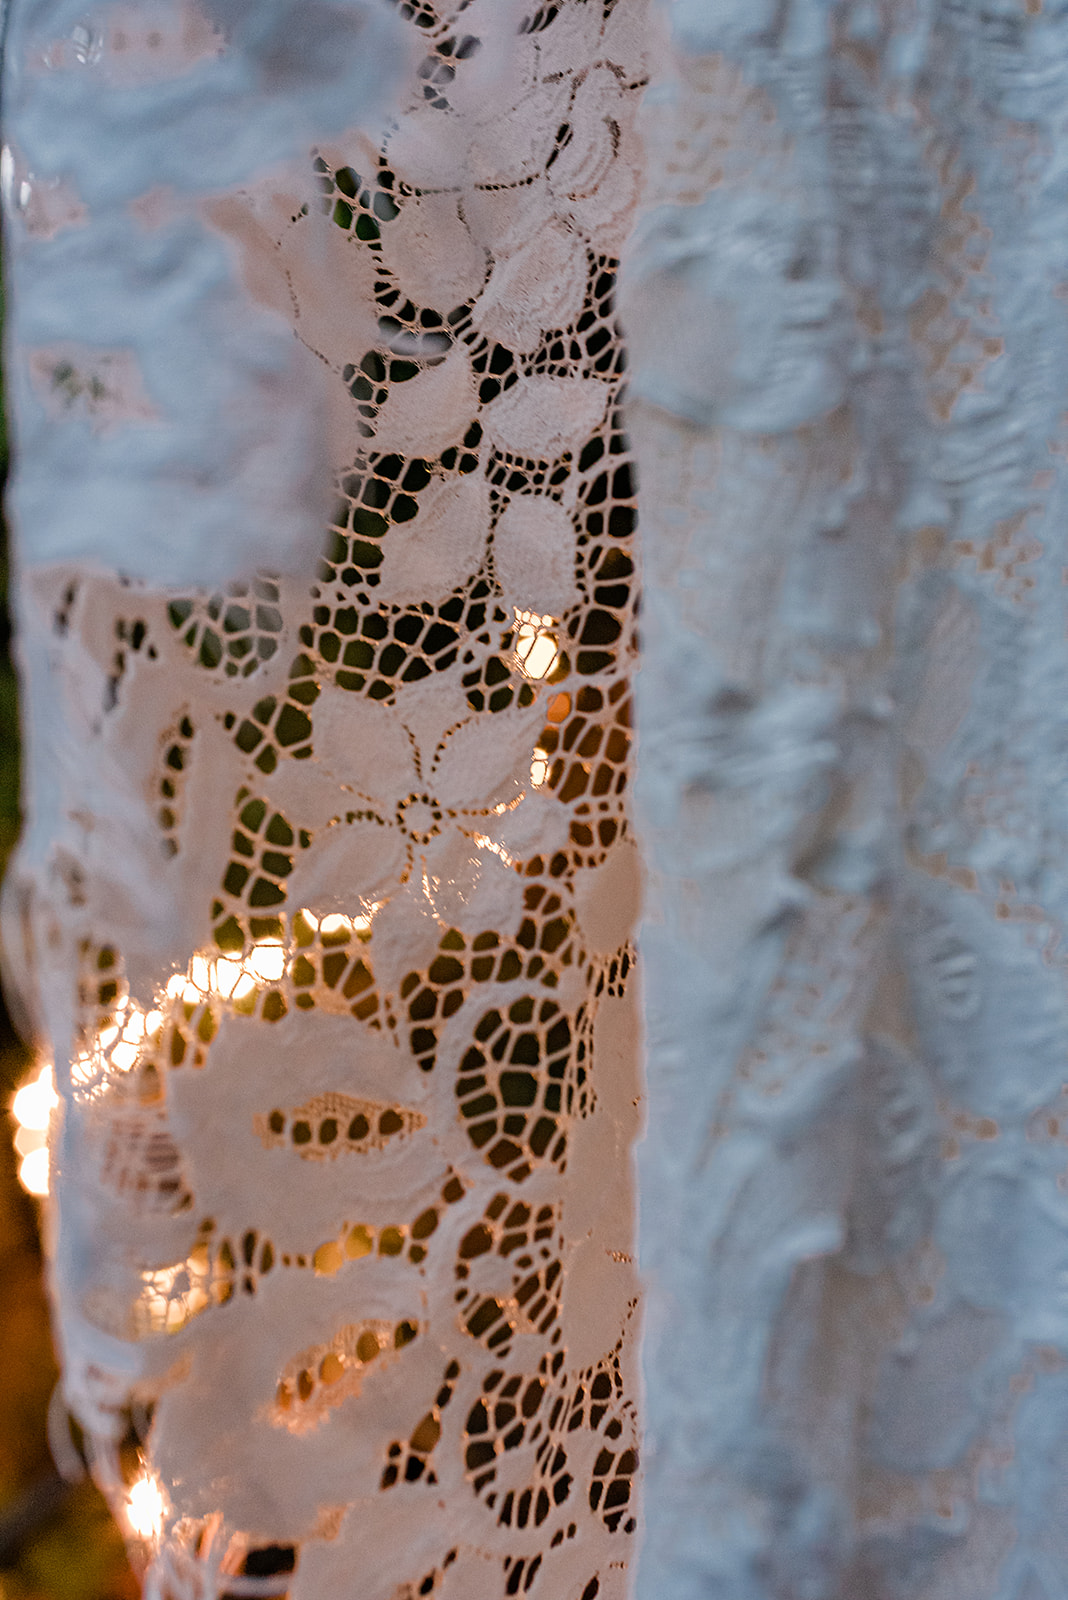 This is a picture of a close-up of a wedding dress.